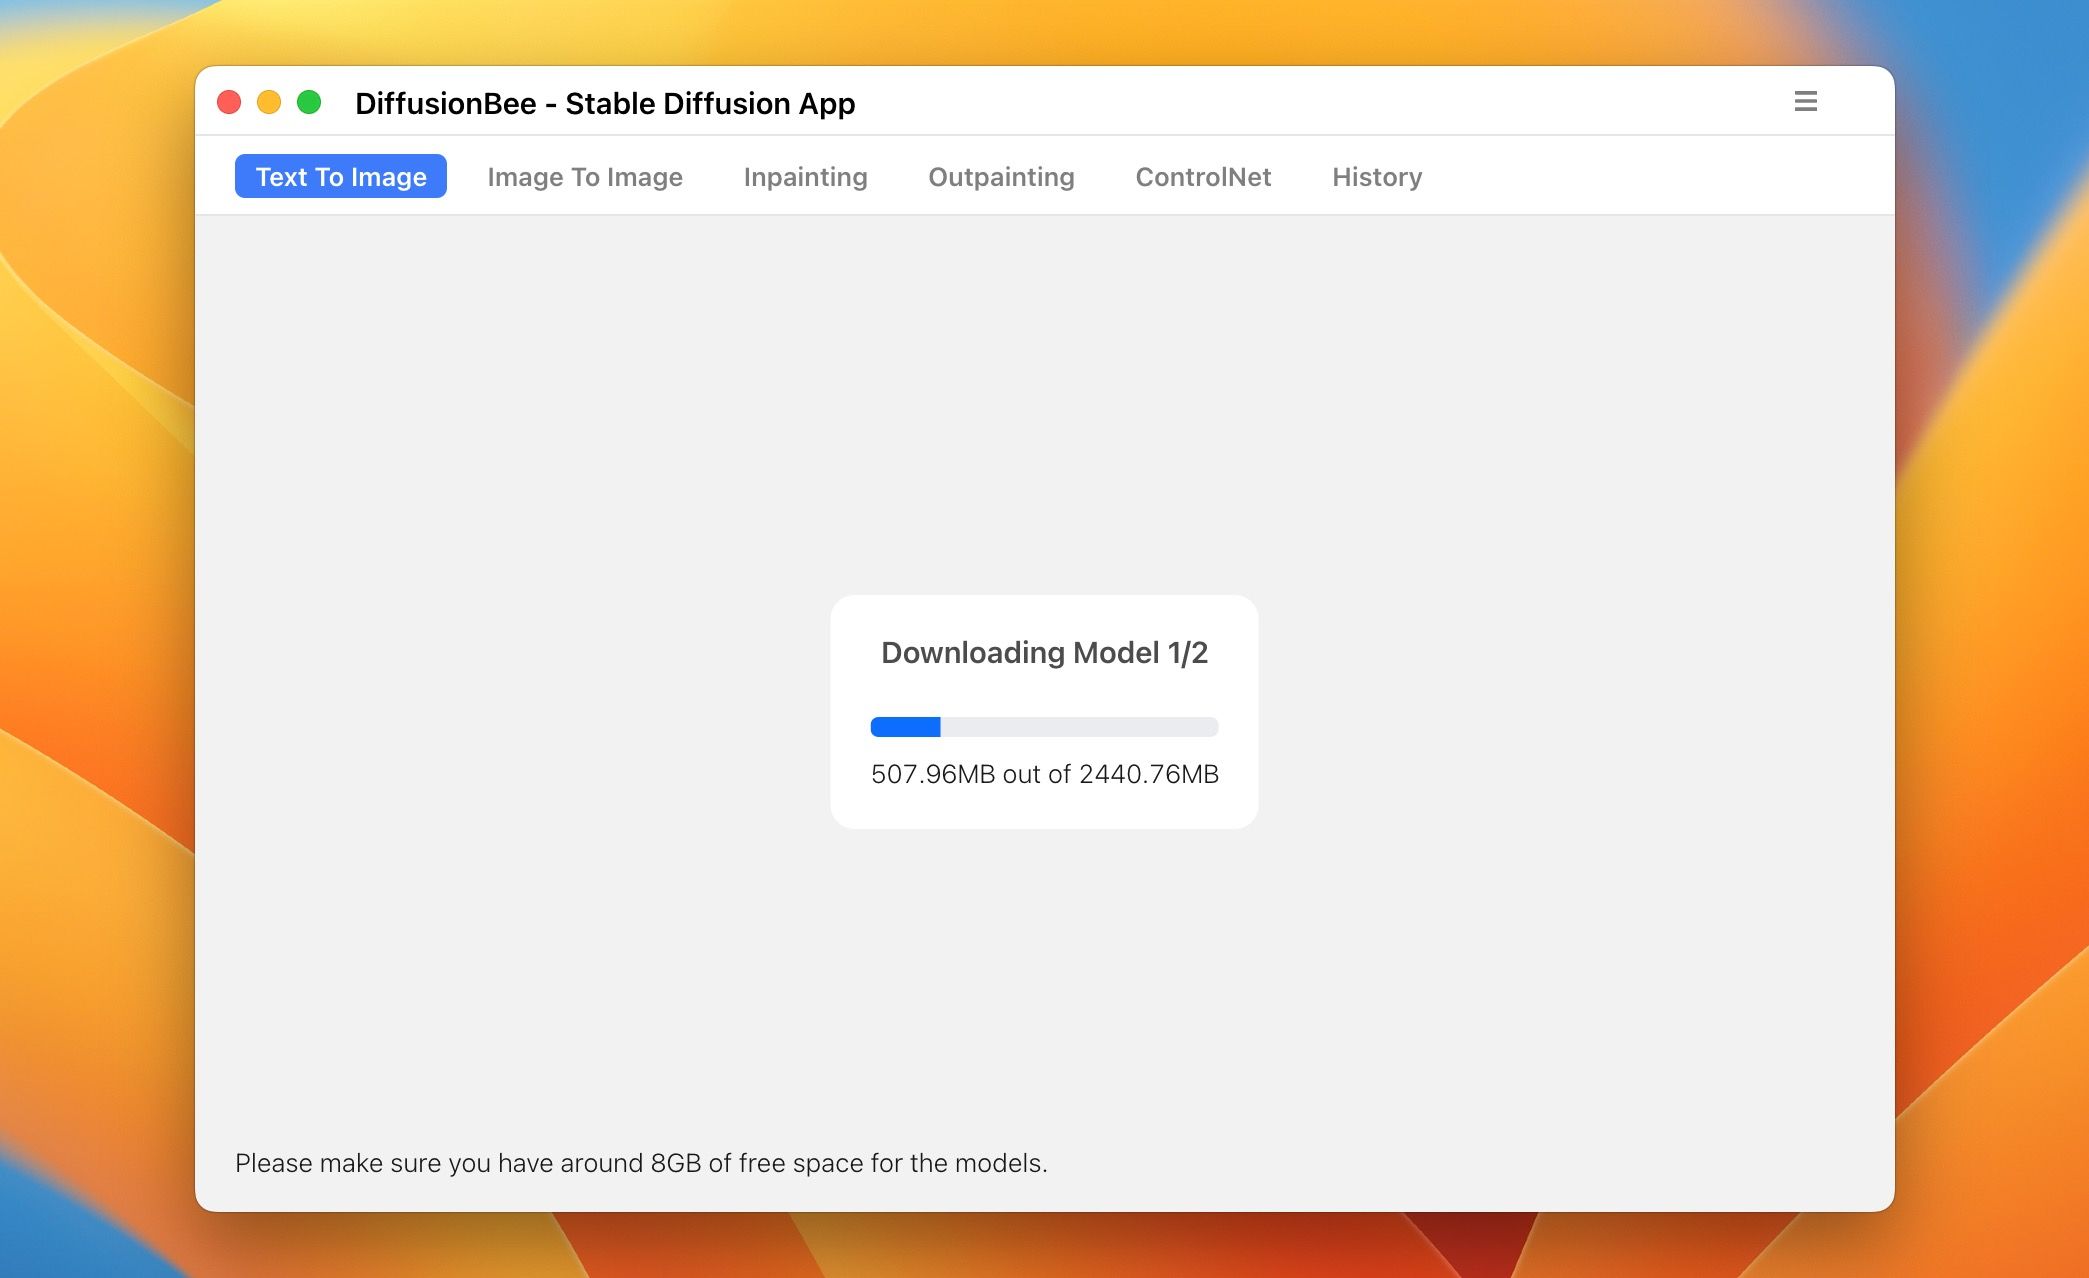 DiffusionBee app downloading the Stable Diffusion model